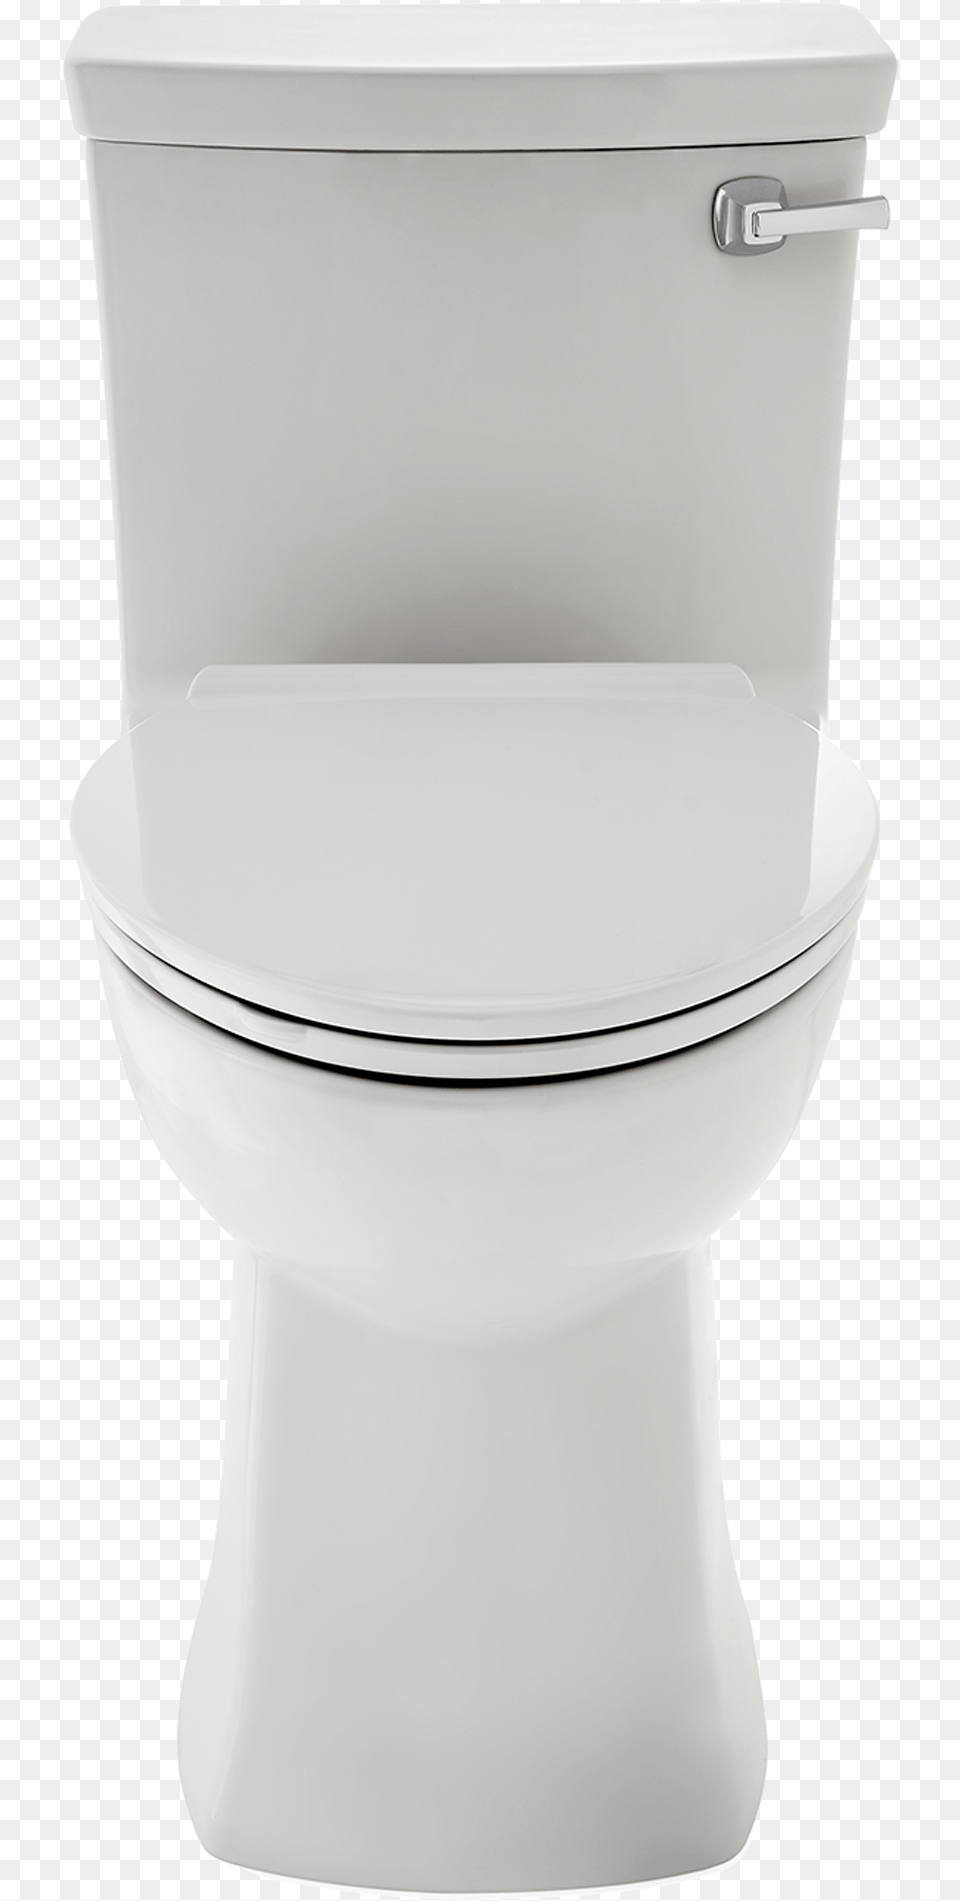 Toilet High Quality Image American Standard 2922a Townsend Vormax Elongated One Piece, Indoors, Bathroom, Room Free Transparent Png